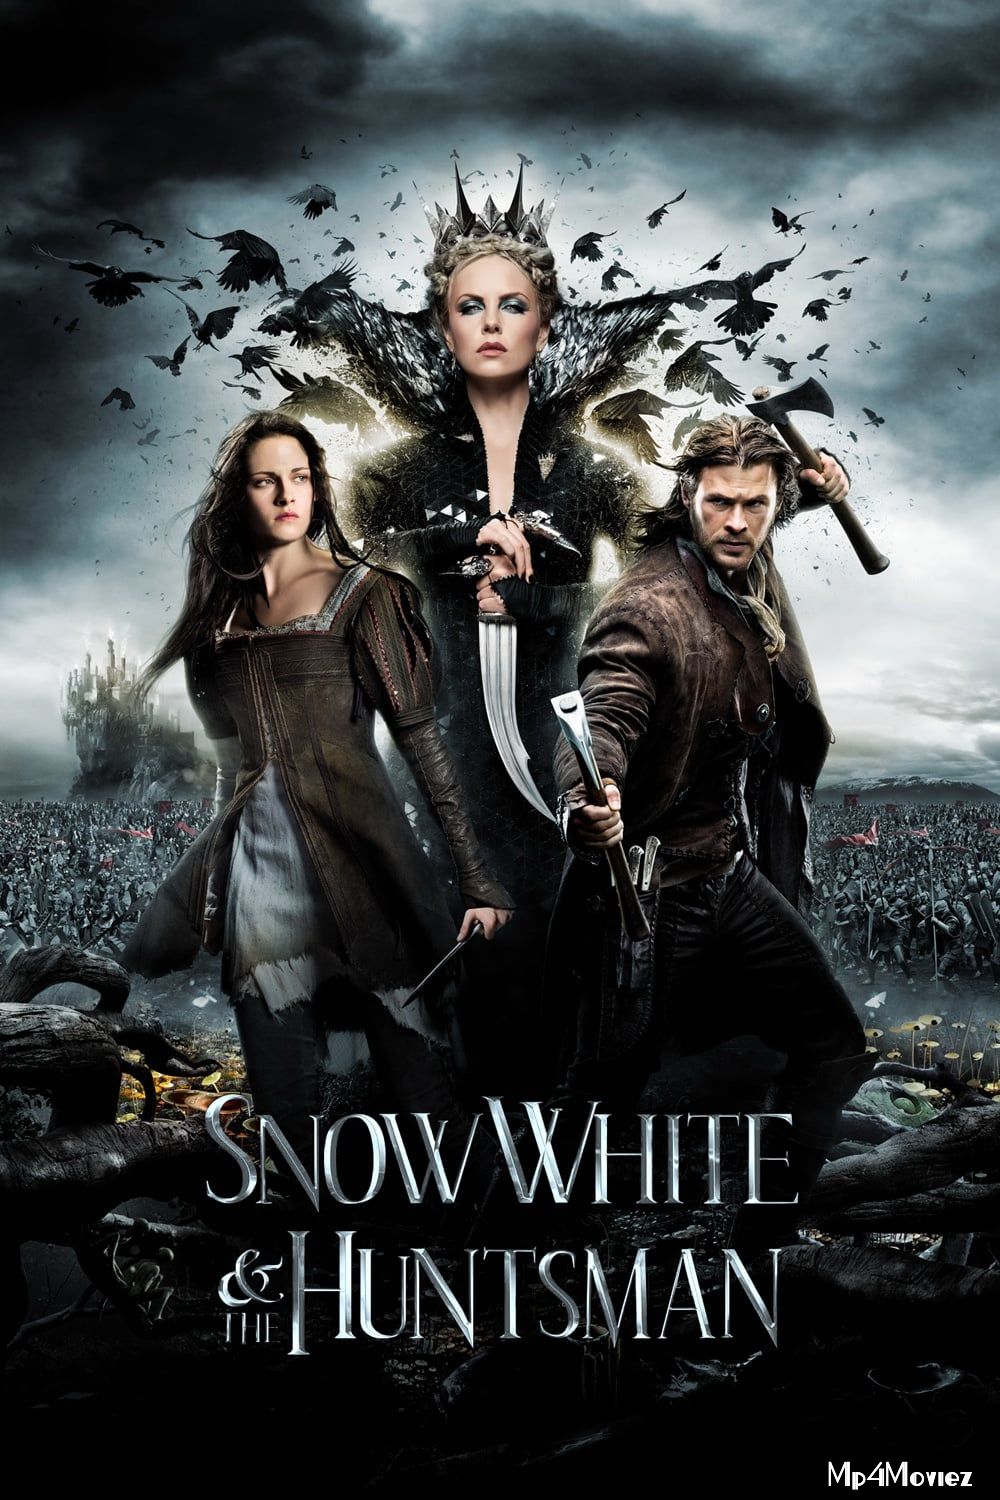 Snow White and the Huntsman (2012) Hindi Dubbed BRRip download full movie